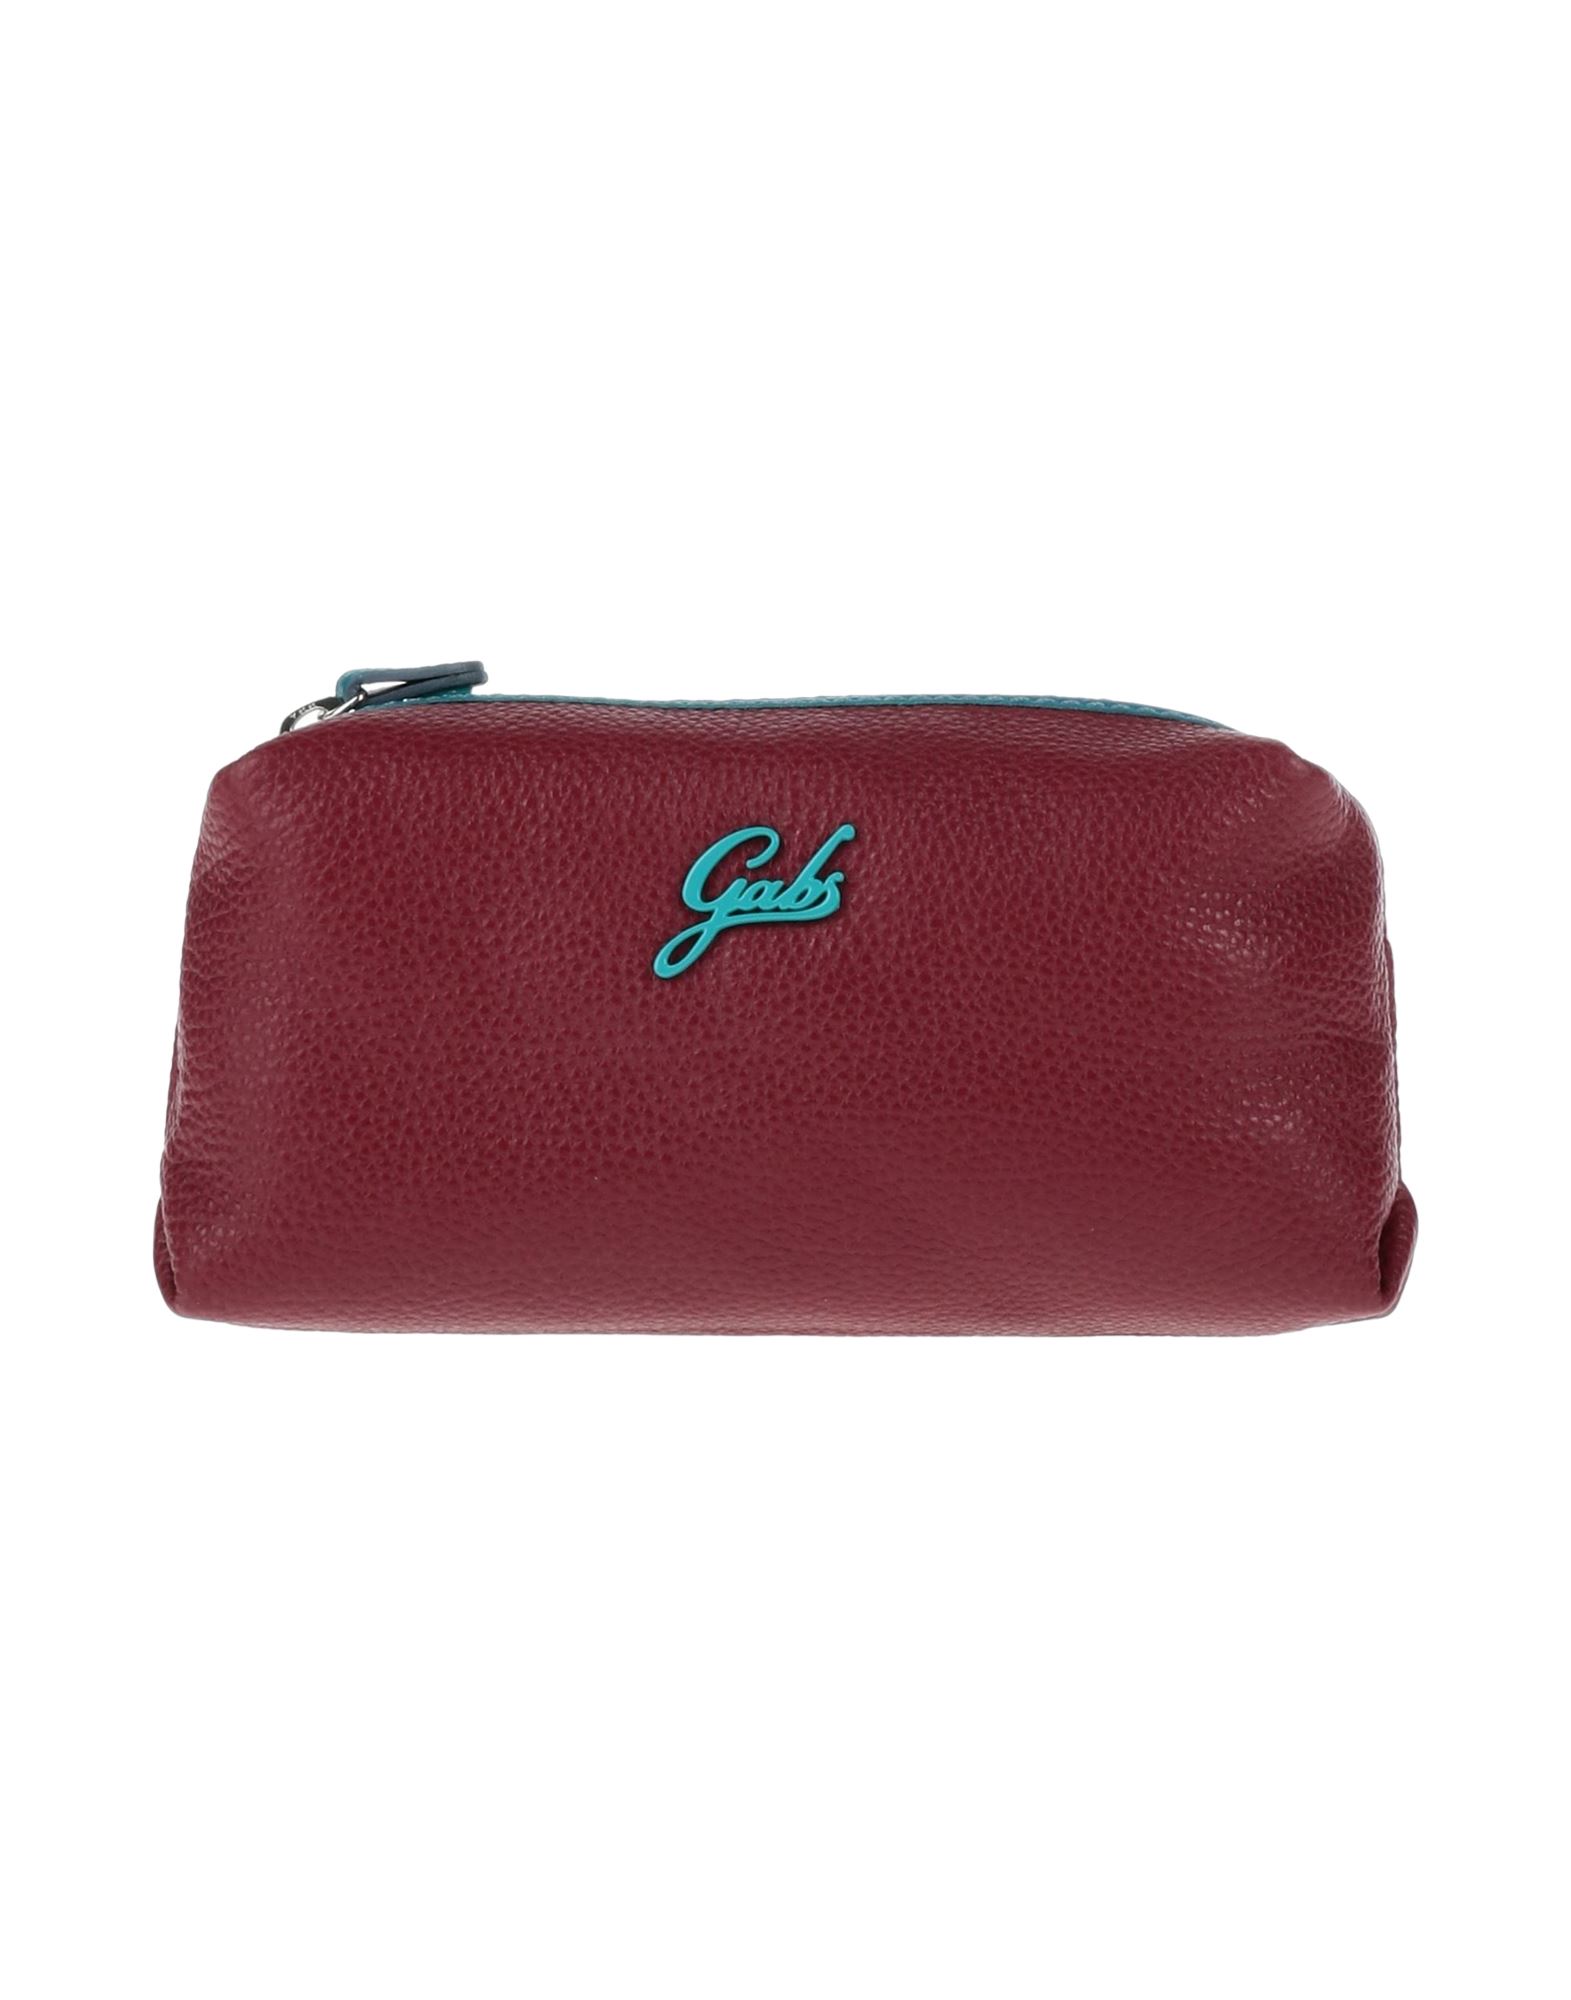 Gabs Beauty Cases In Brick Red